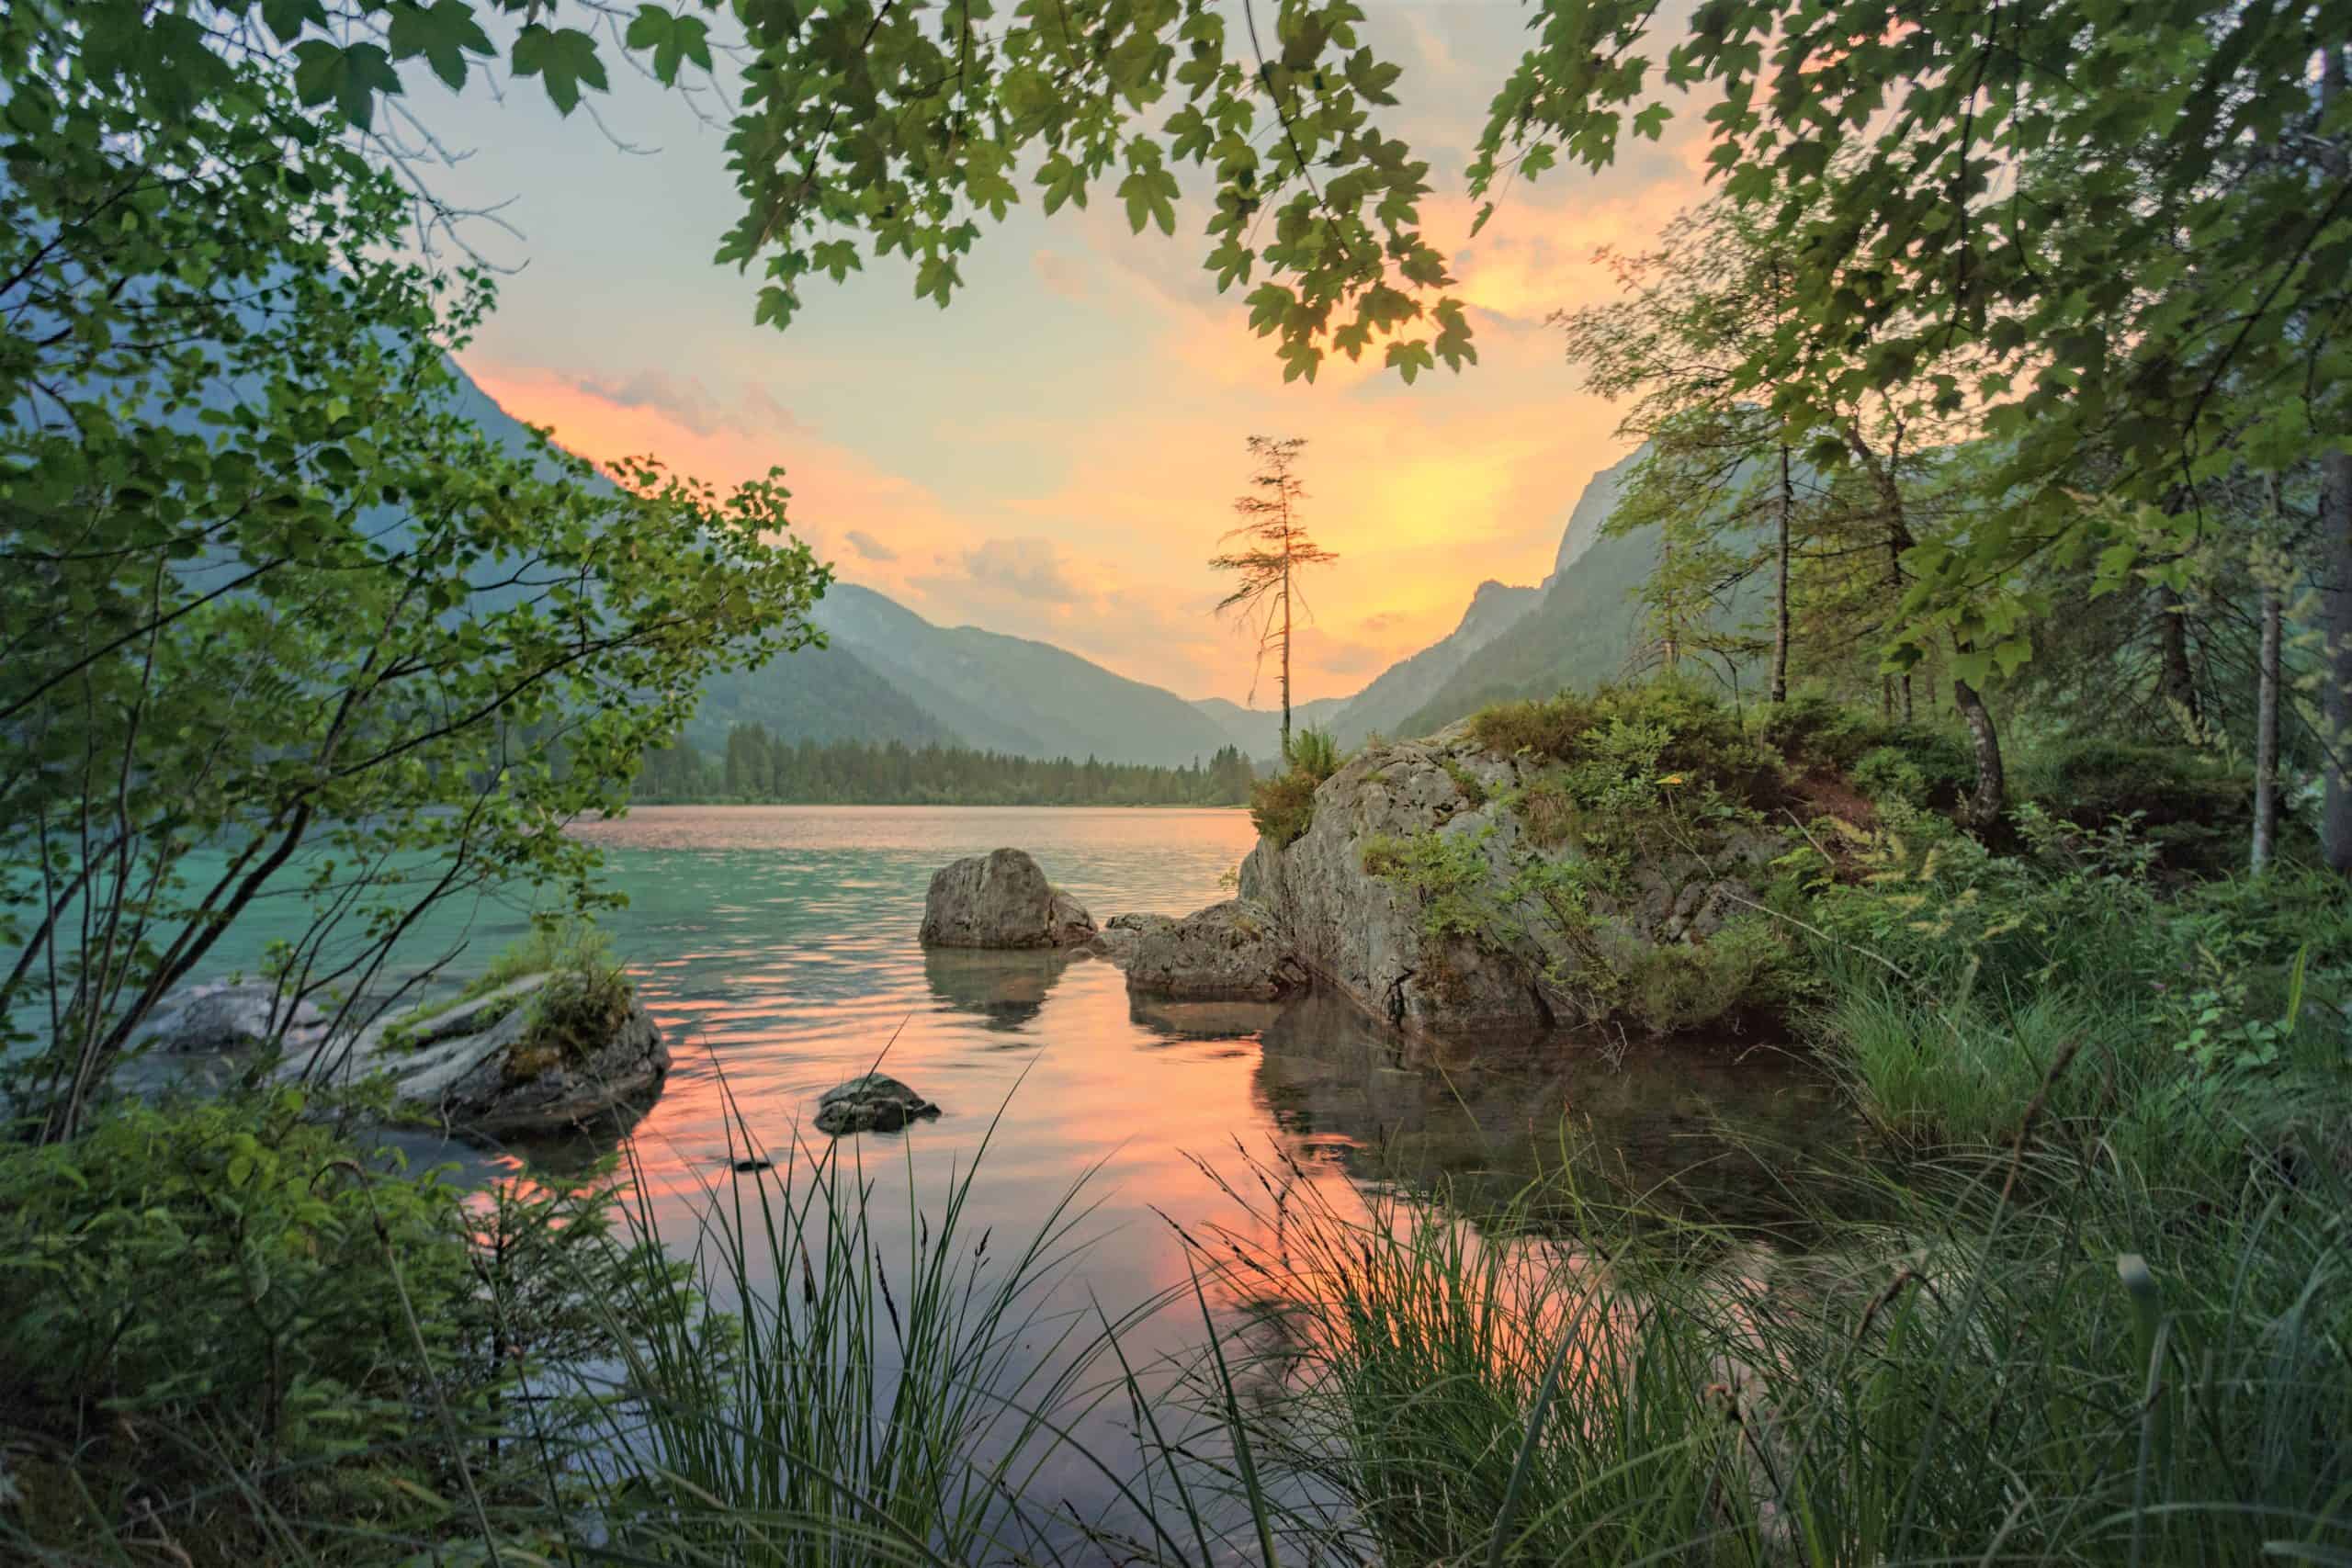 A serene lake at sunset surrounded by green trees.